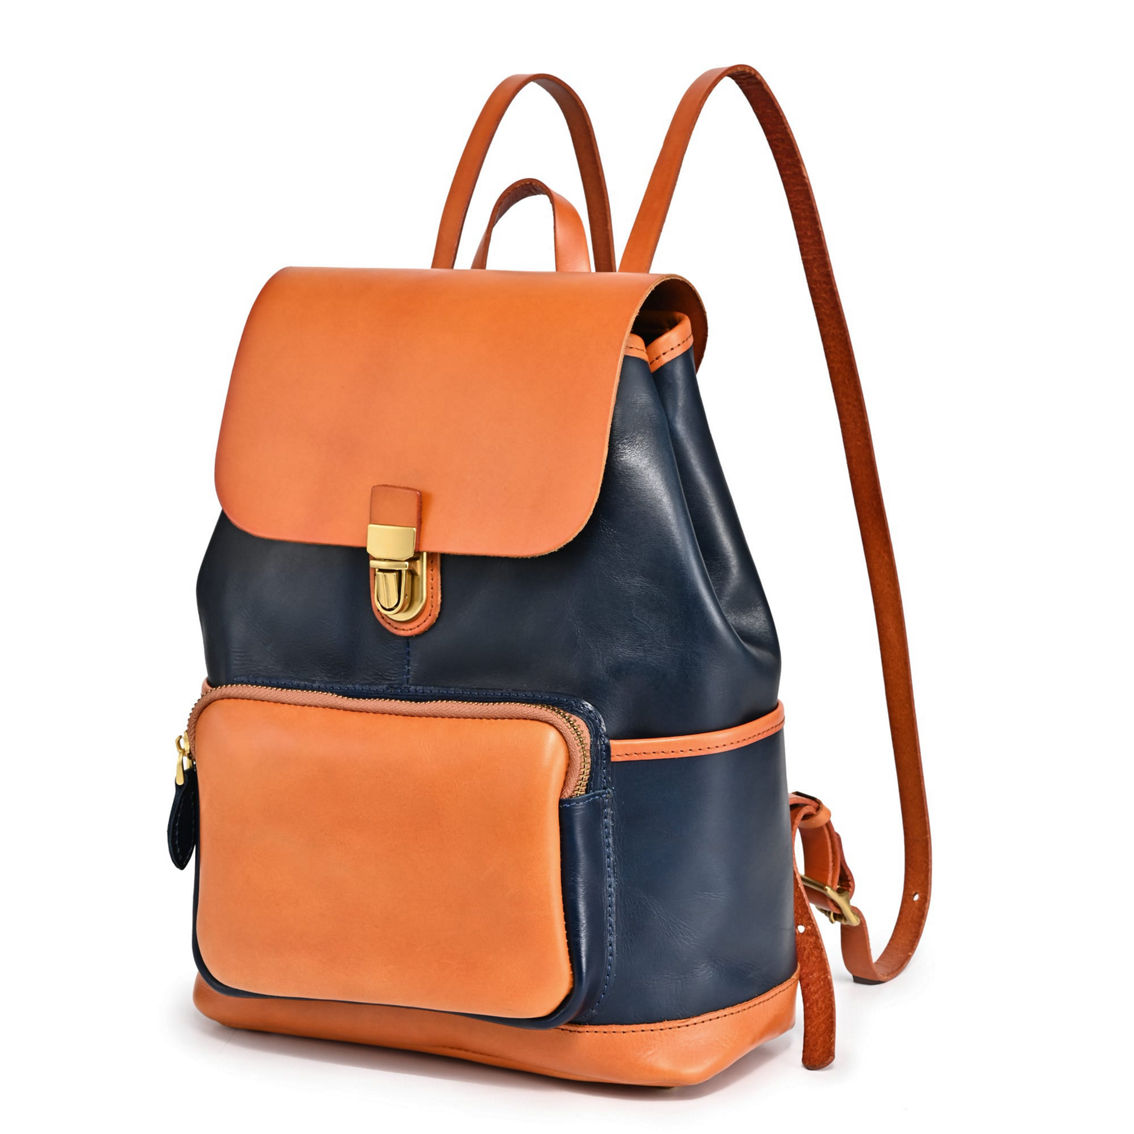 Old Trend Out West Leather Backpack - Image 2 of 5